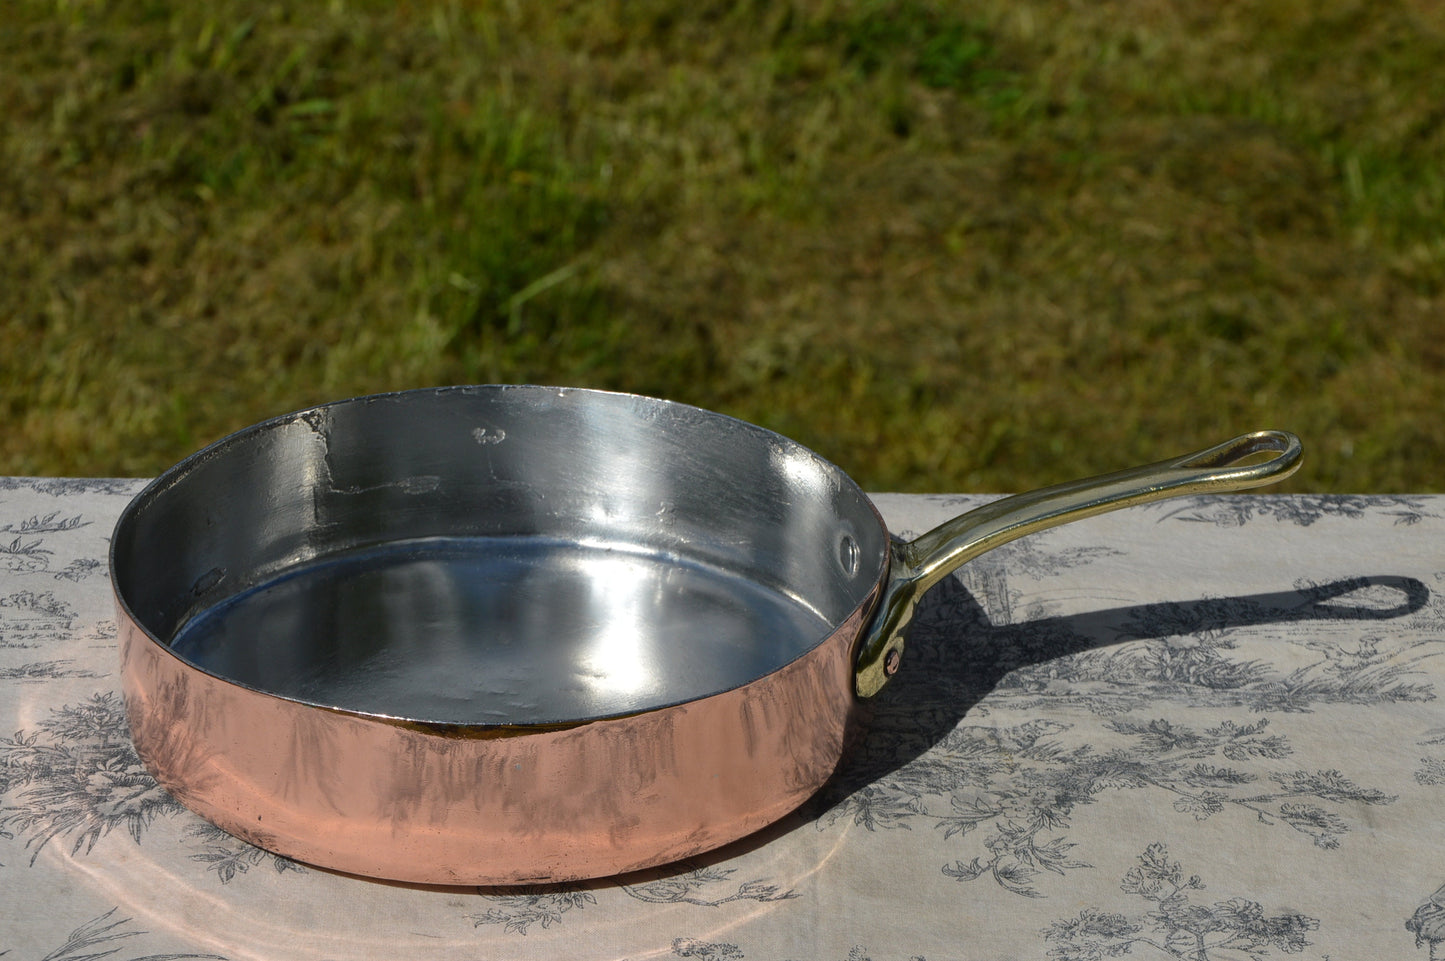 Gaillard of Paris Copper Pan New Artisan Tin 24 cm 9 1/2" Vintage French Well Used Professional Saute Fry Pan 1.8mm Cast Bronze Handle